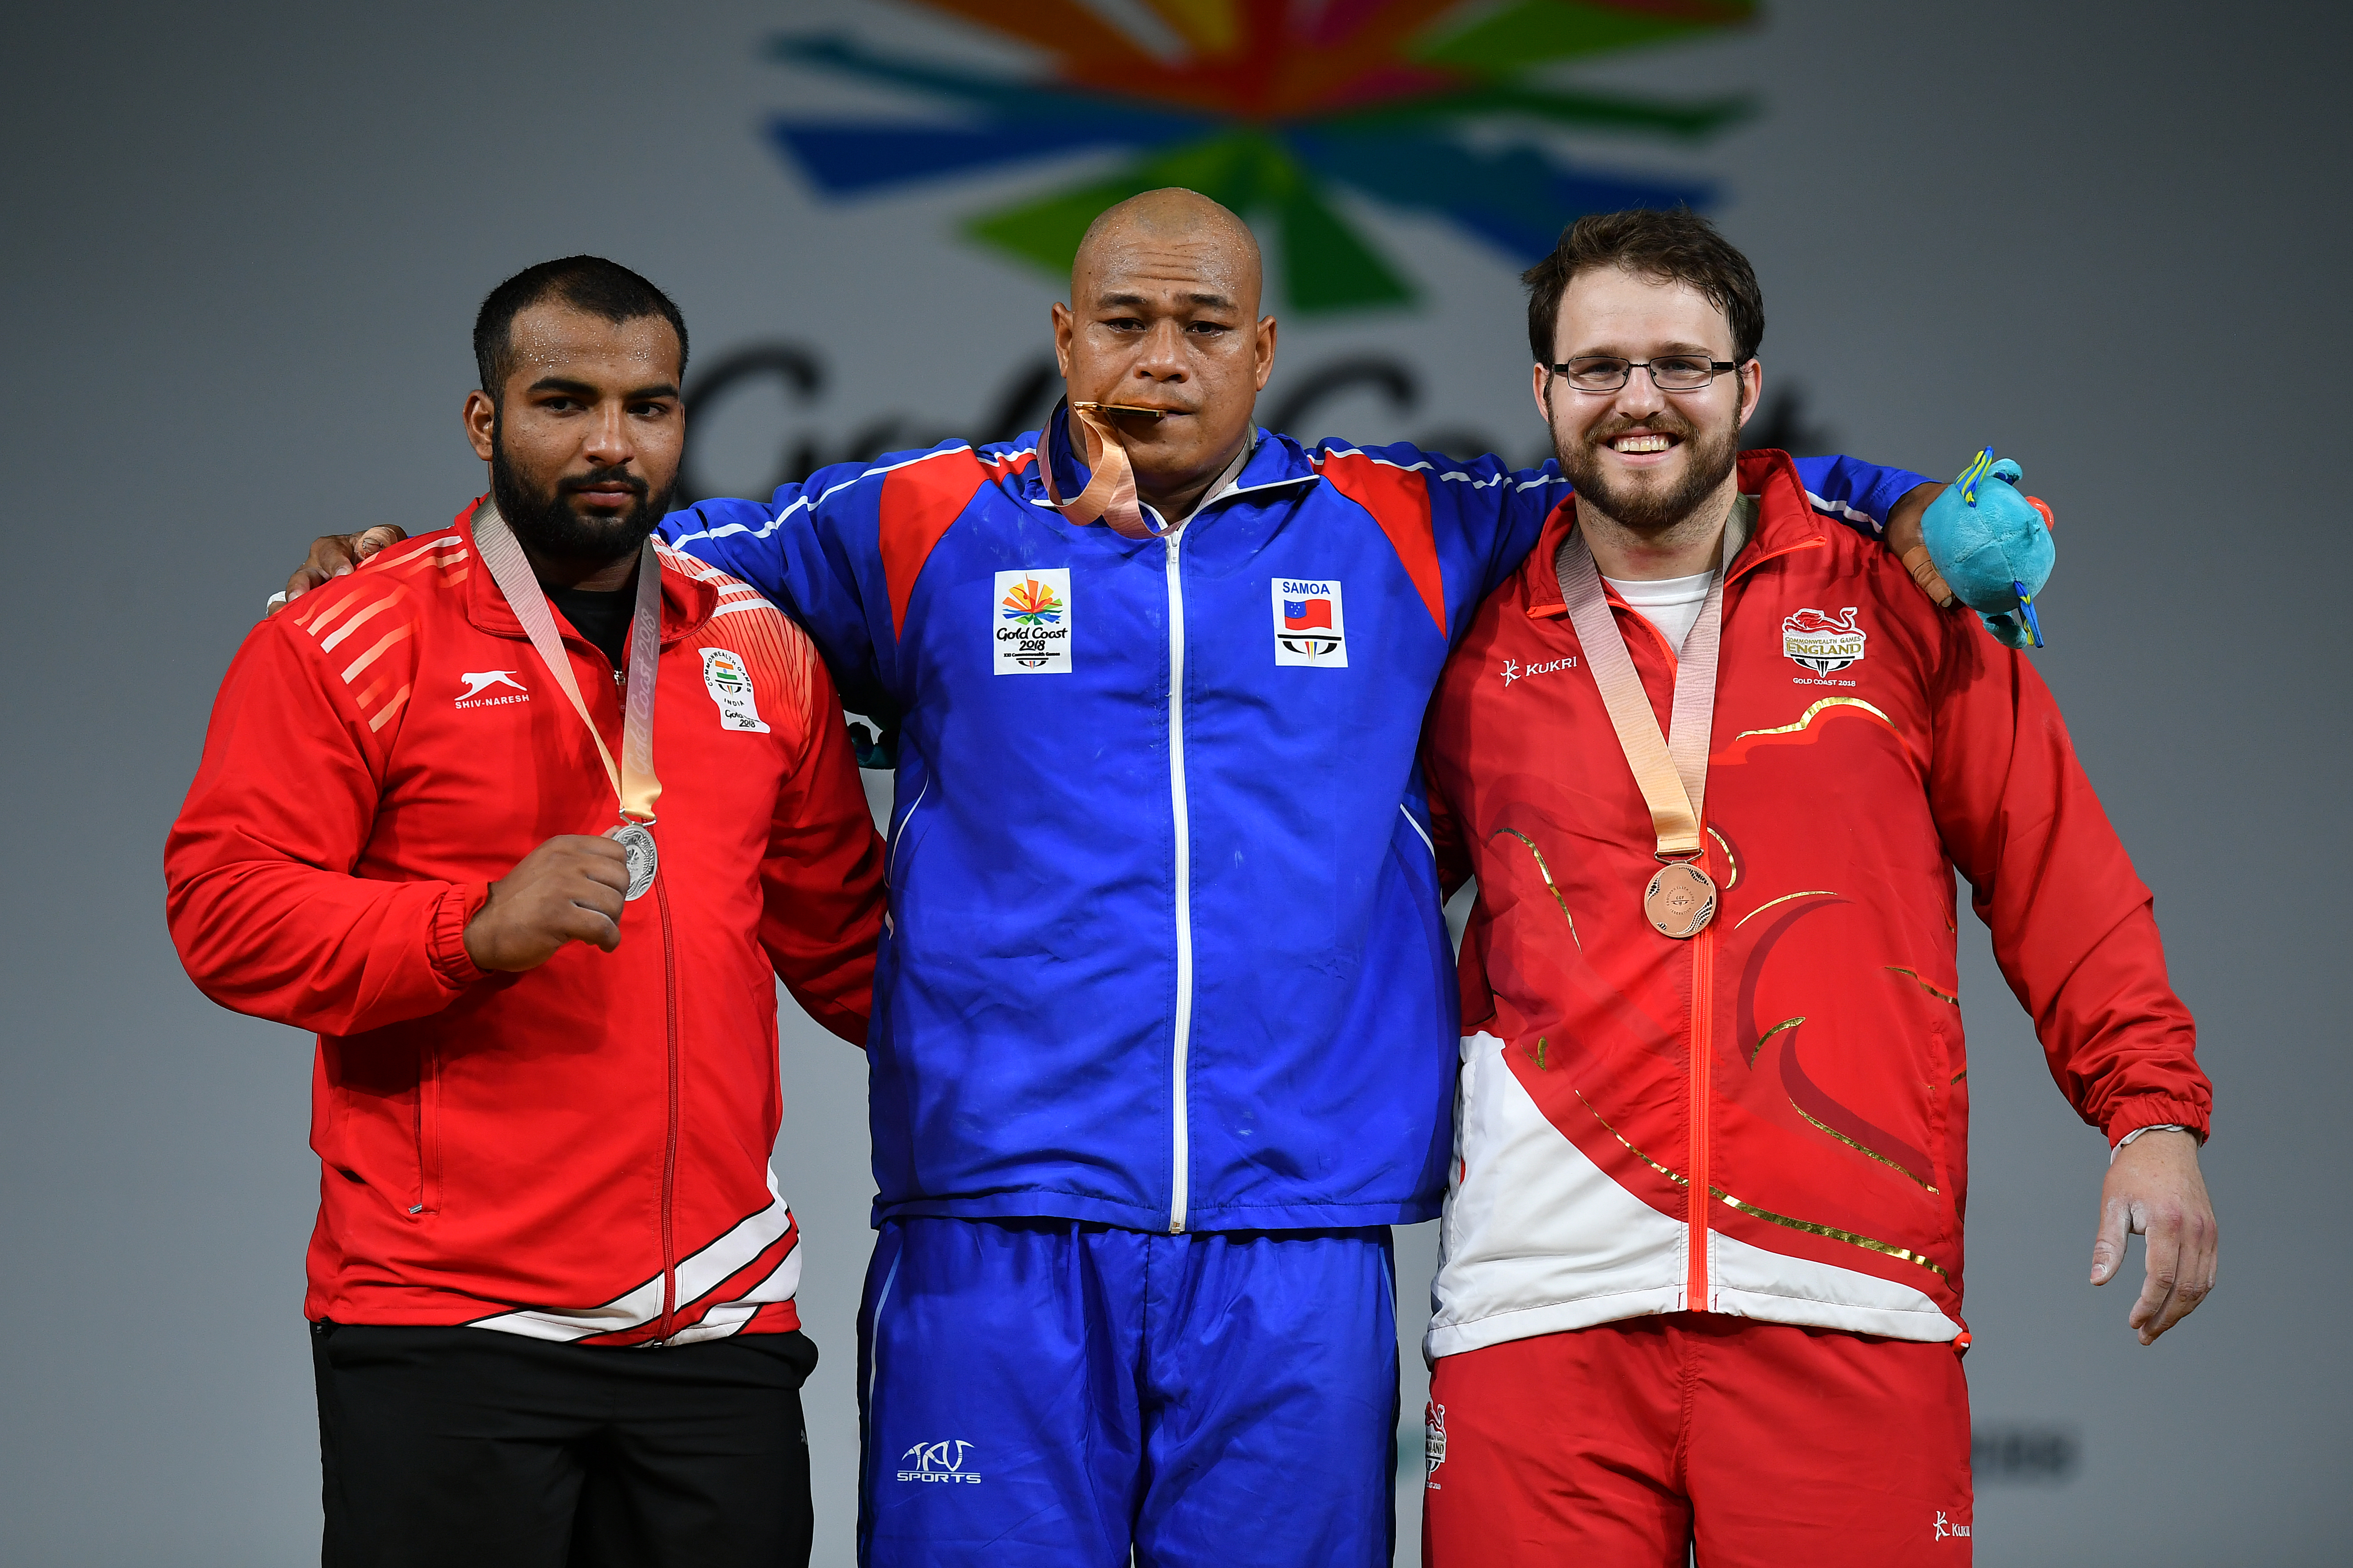 CWG 2018 | Pardeep Singh clinches silver for India in 105 kg Weightlifting